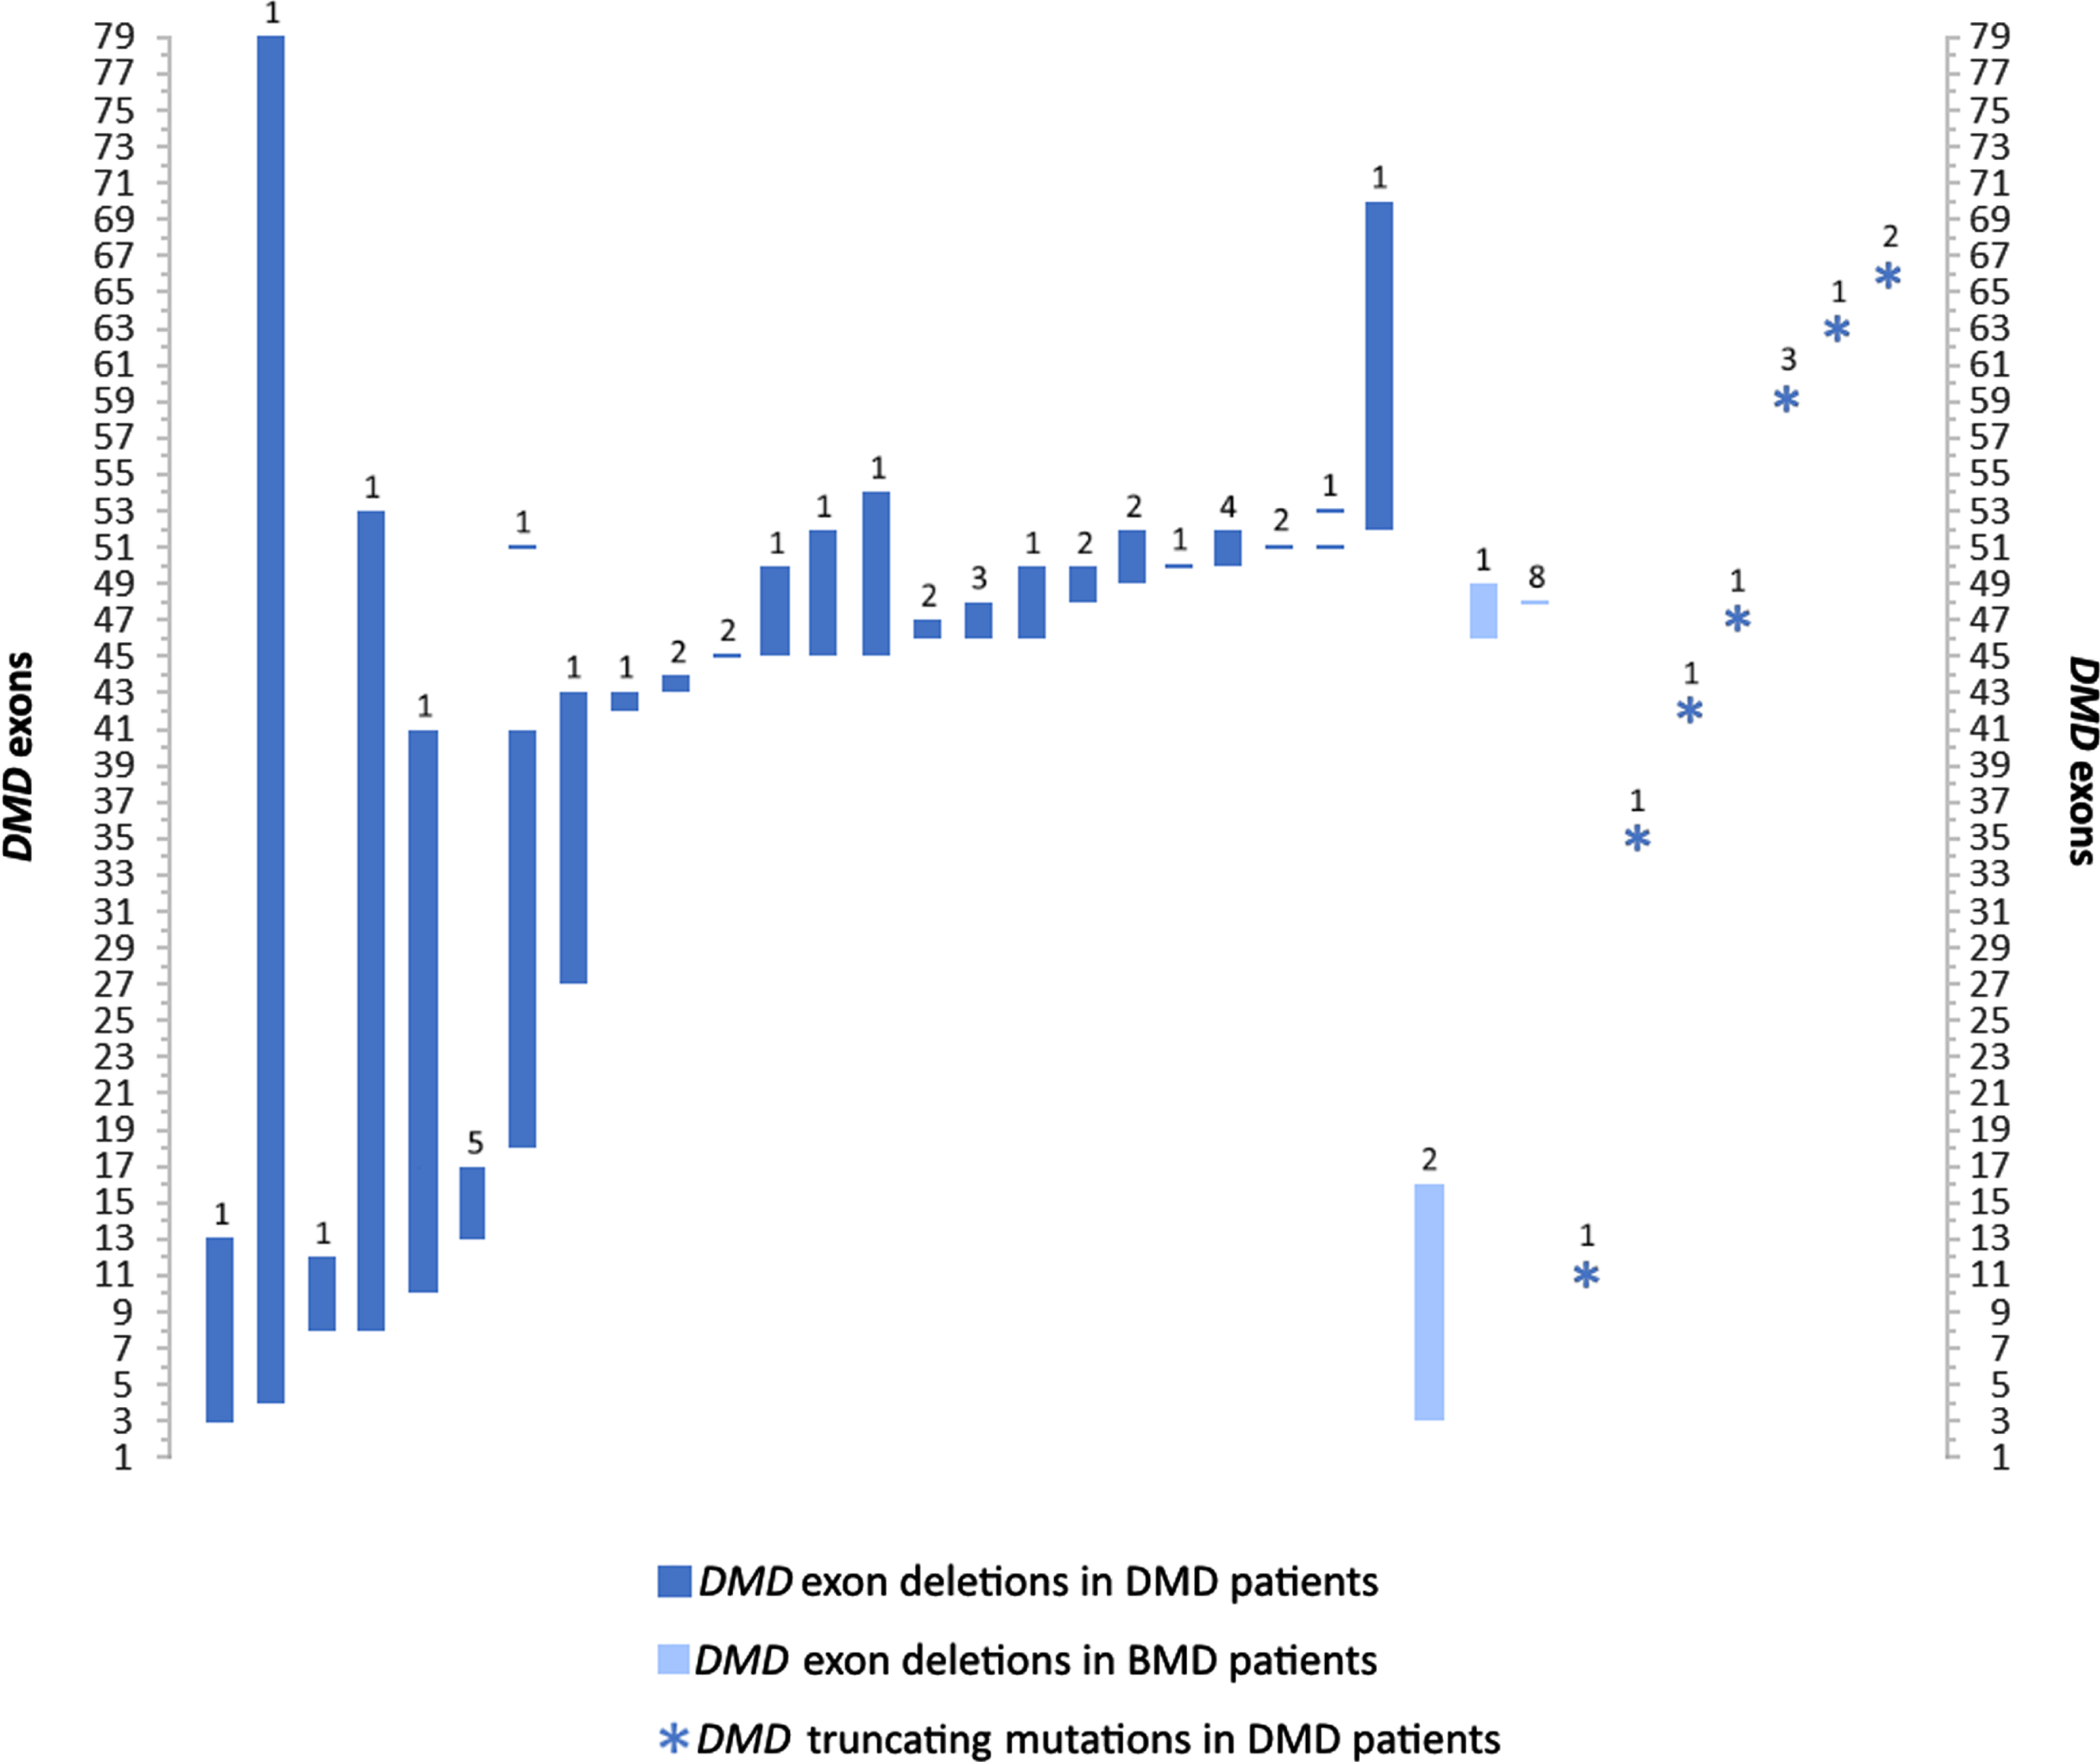 Exonal dystrophin (DMD) deletion and truncating mutation patterns in patients with DMD and BMD in this study. Values over each bar represent the number of patients for each of the 36 variants. Remaining DMD mutations including duplication, translocation, and splice site variants are described in Table 2.